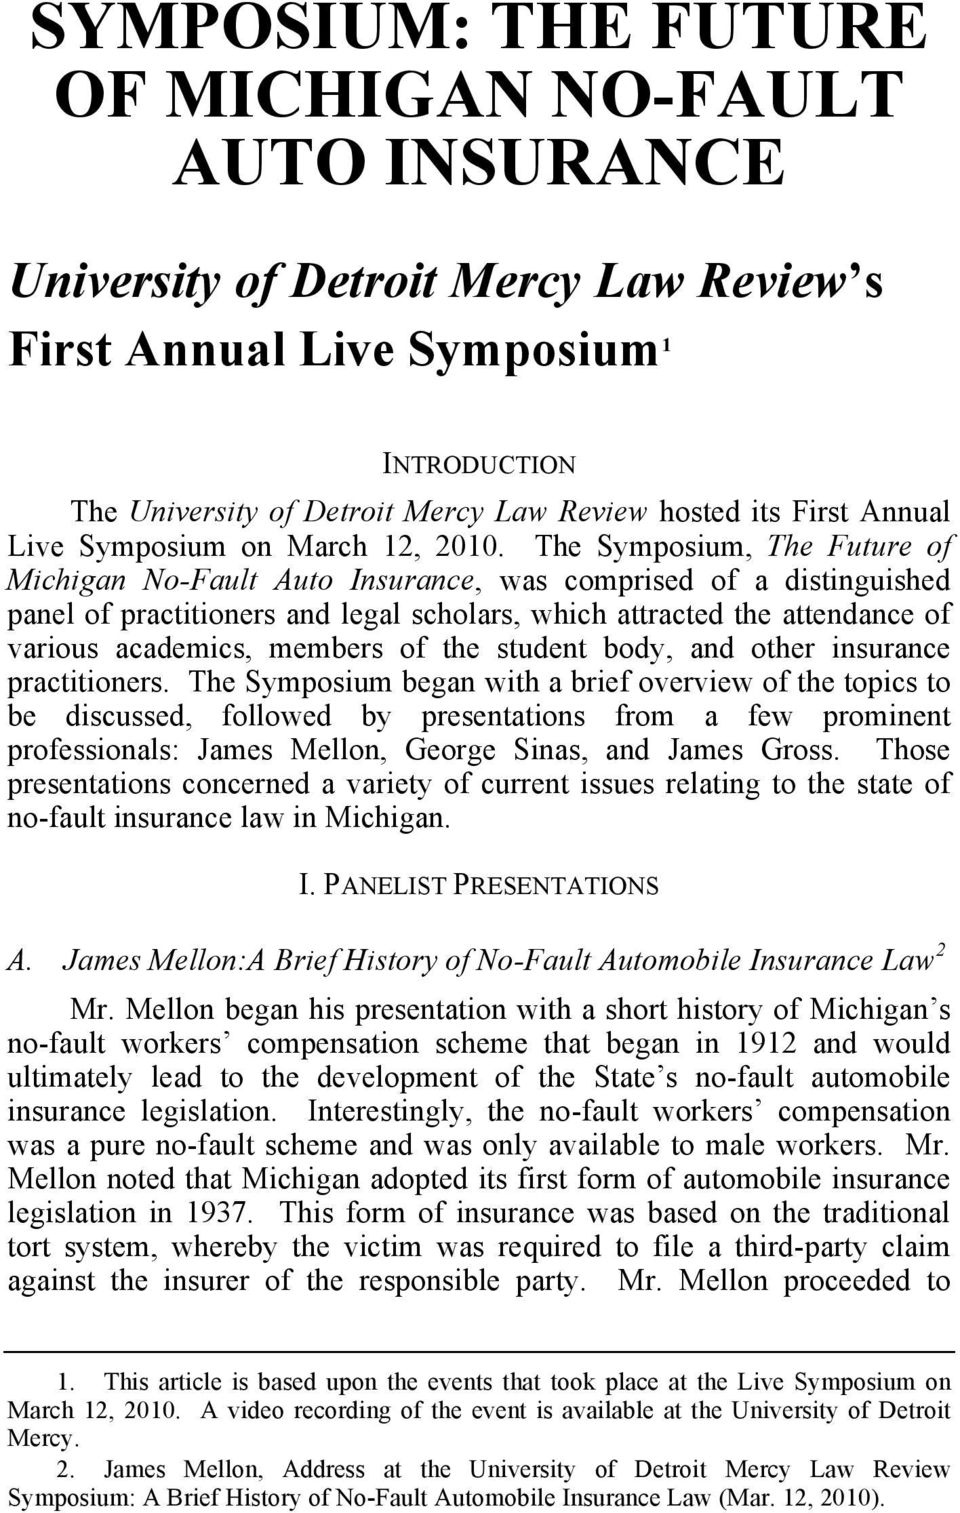 The Symposium, The Future of Michigan No-Fault Auto Insurance, was comprised of a distinguished panel of practitioners and legal scholars, which attracted the attendance of various academics, members